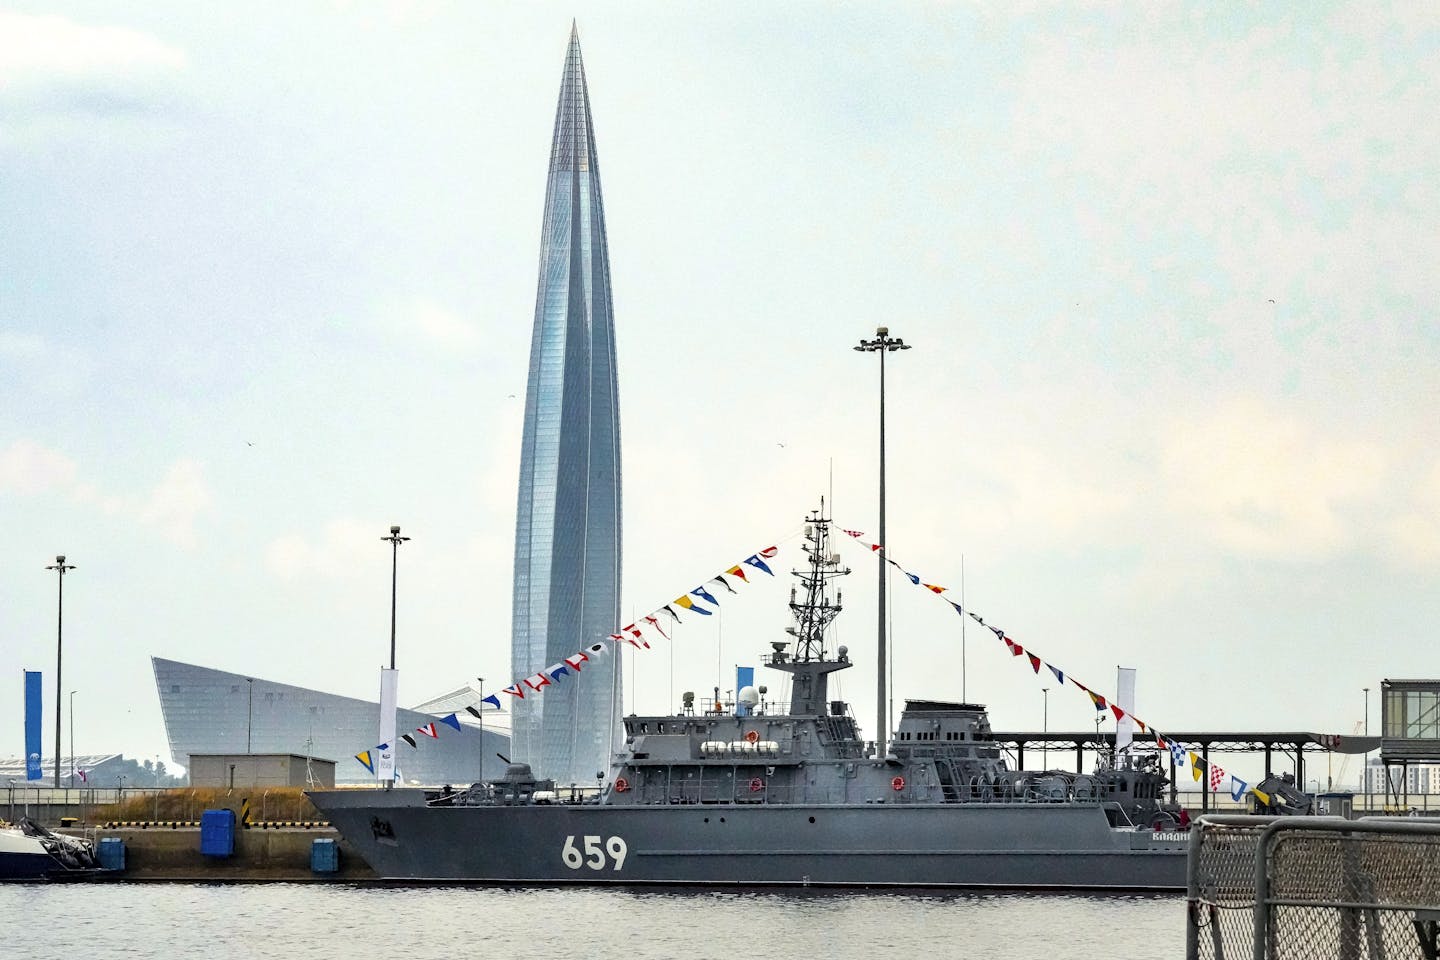 A tall pointed skyscraper with battleship in foreground.